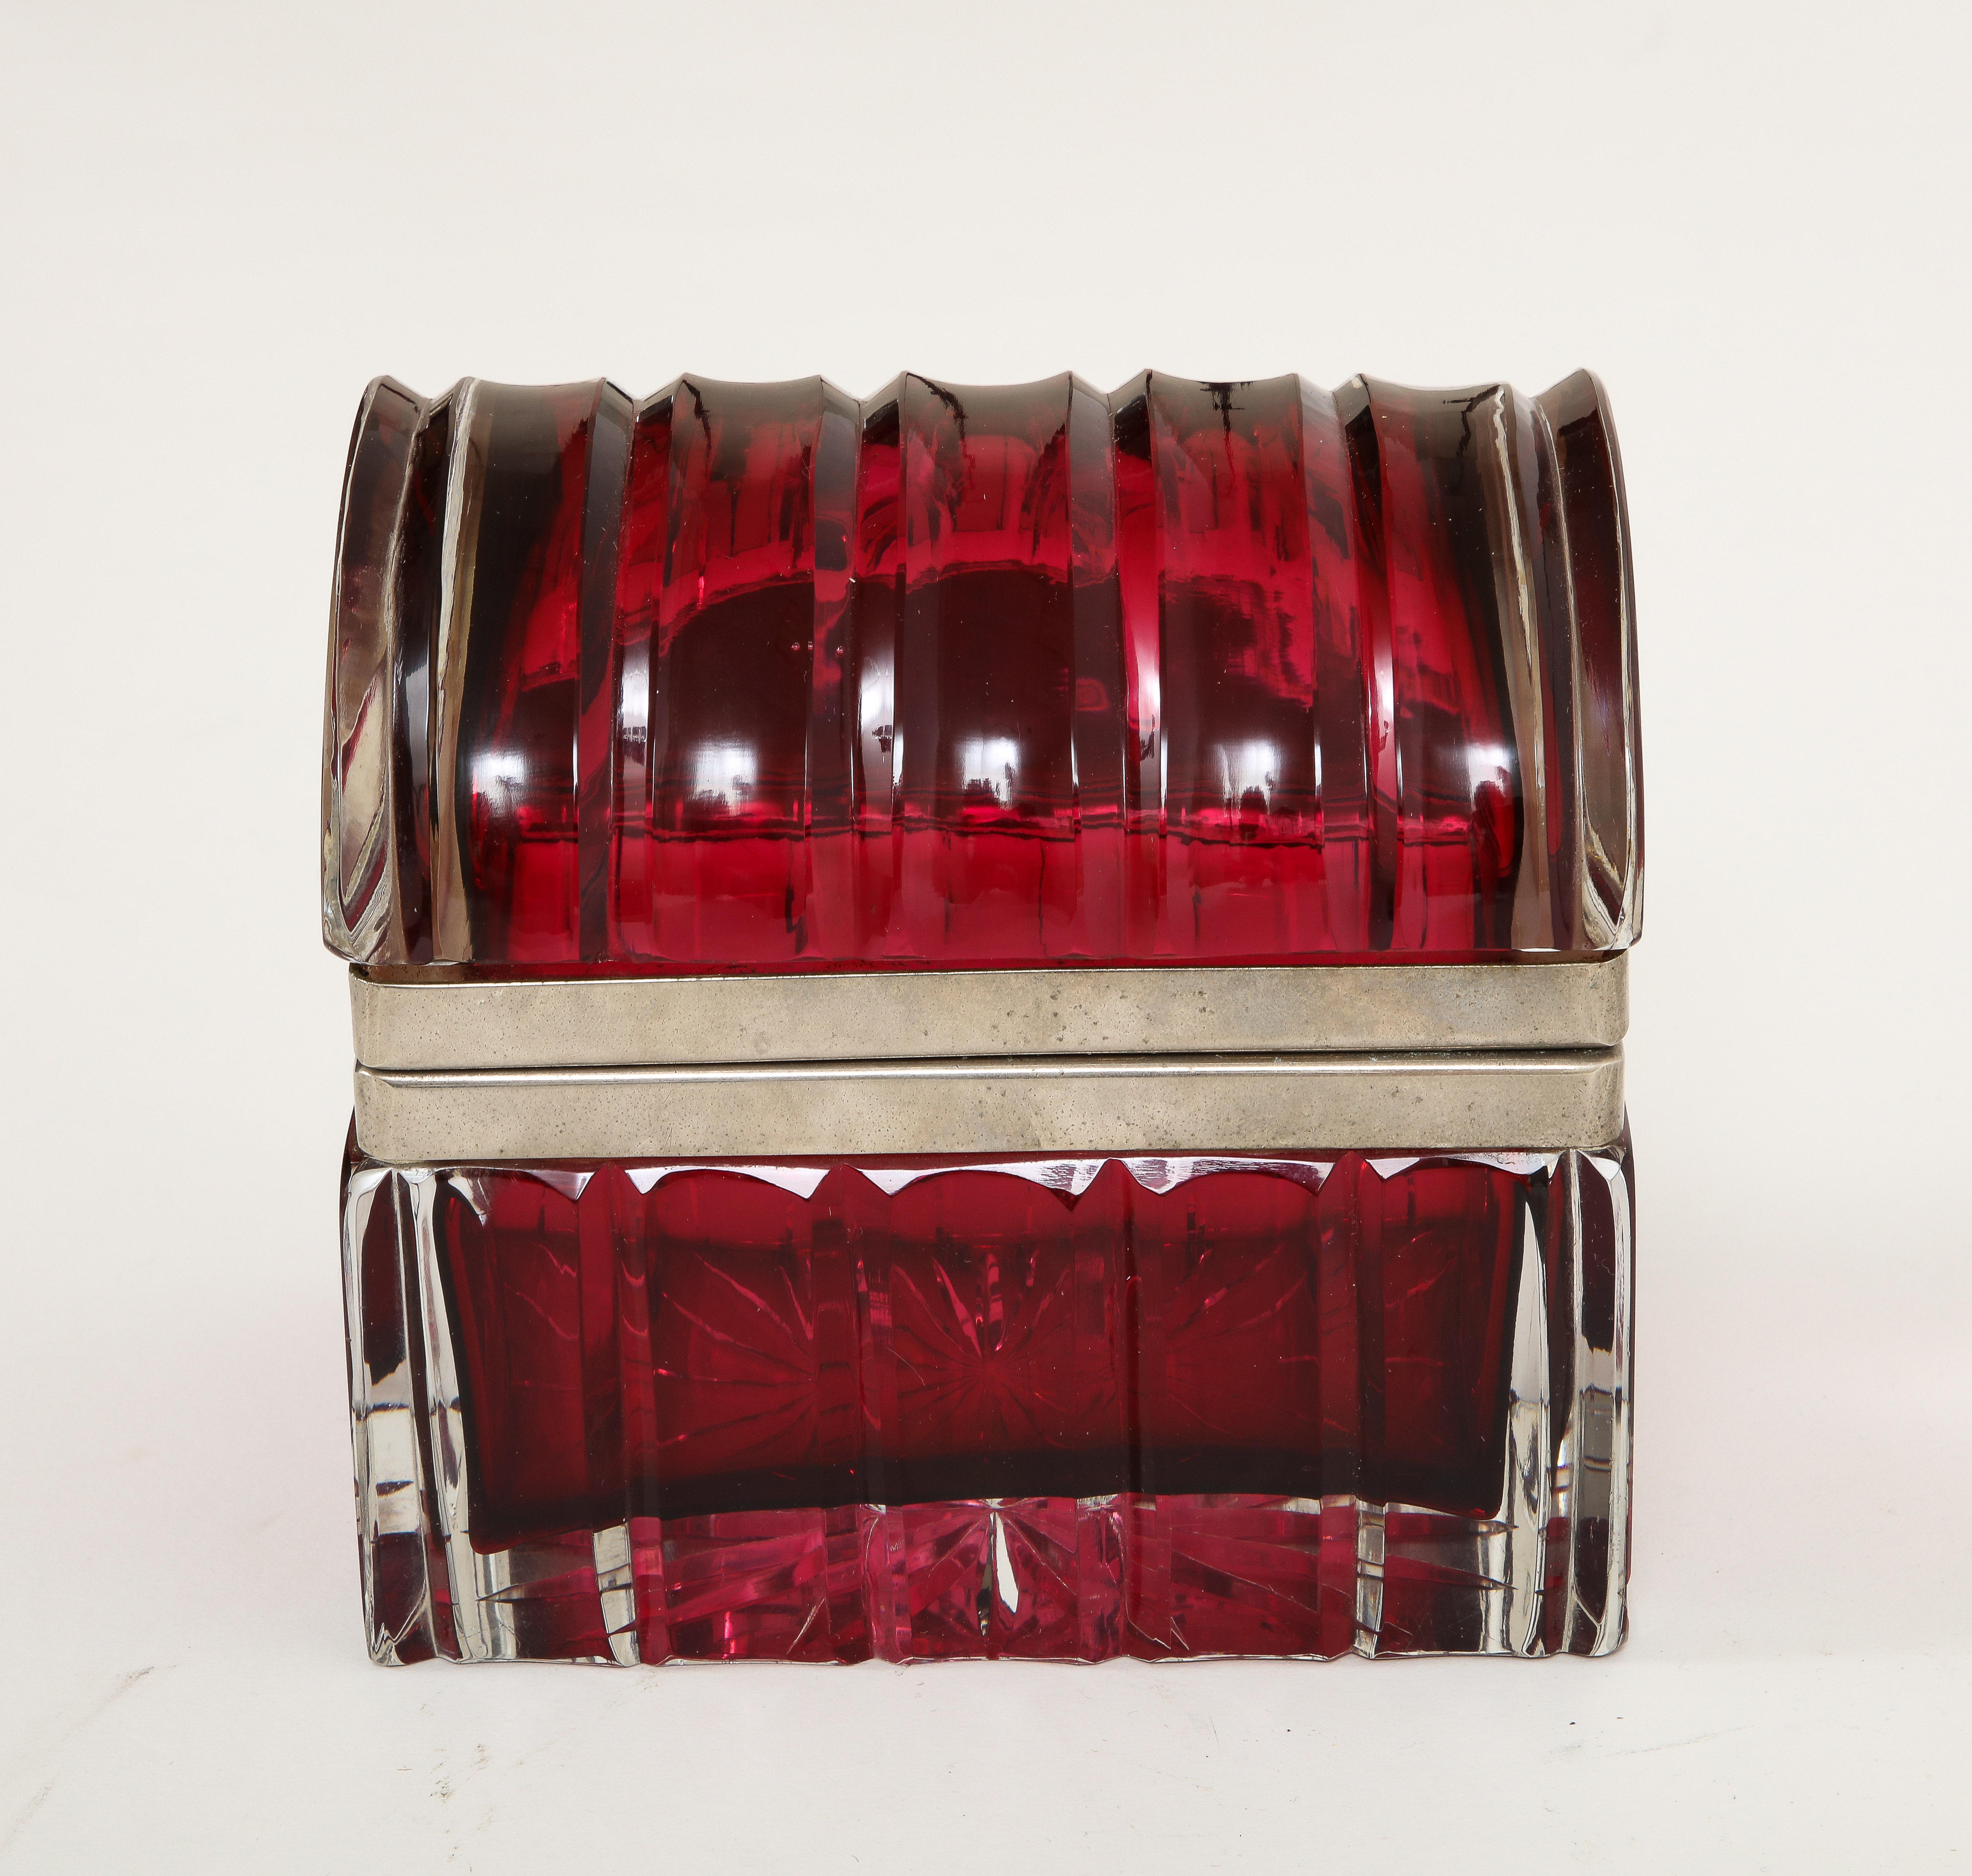 An Unusual 20th Century Italian Silvered Bronze Mounted Clear-Over-red crystal box The box is composed of two sections of Italian clear-over-red crystal which are mounted to a fabulous silvered bronze latch. The silvered bronze is beautiful with a